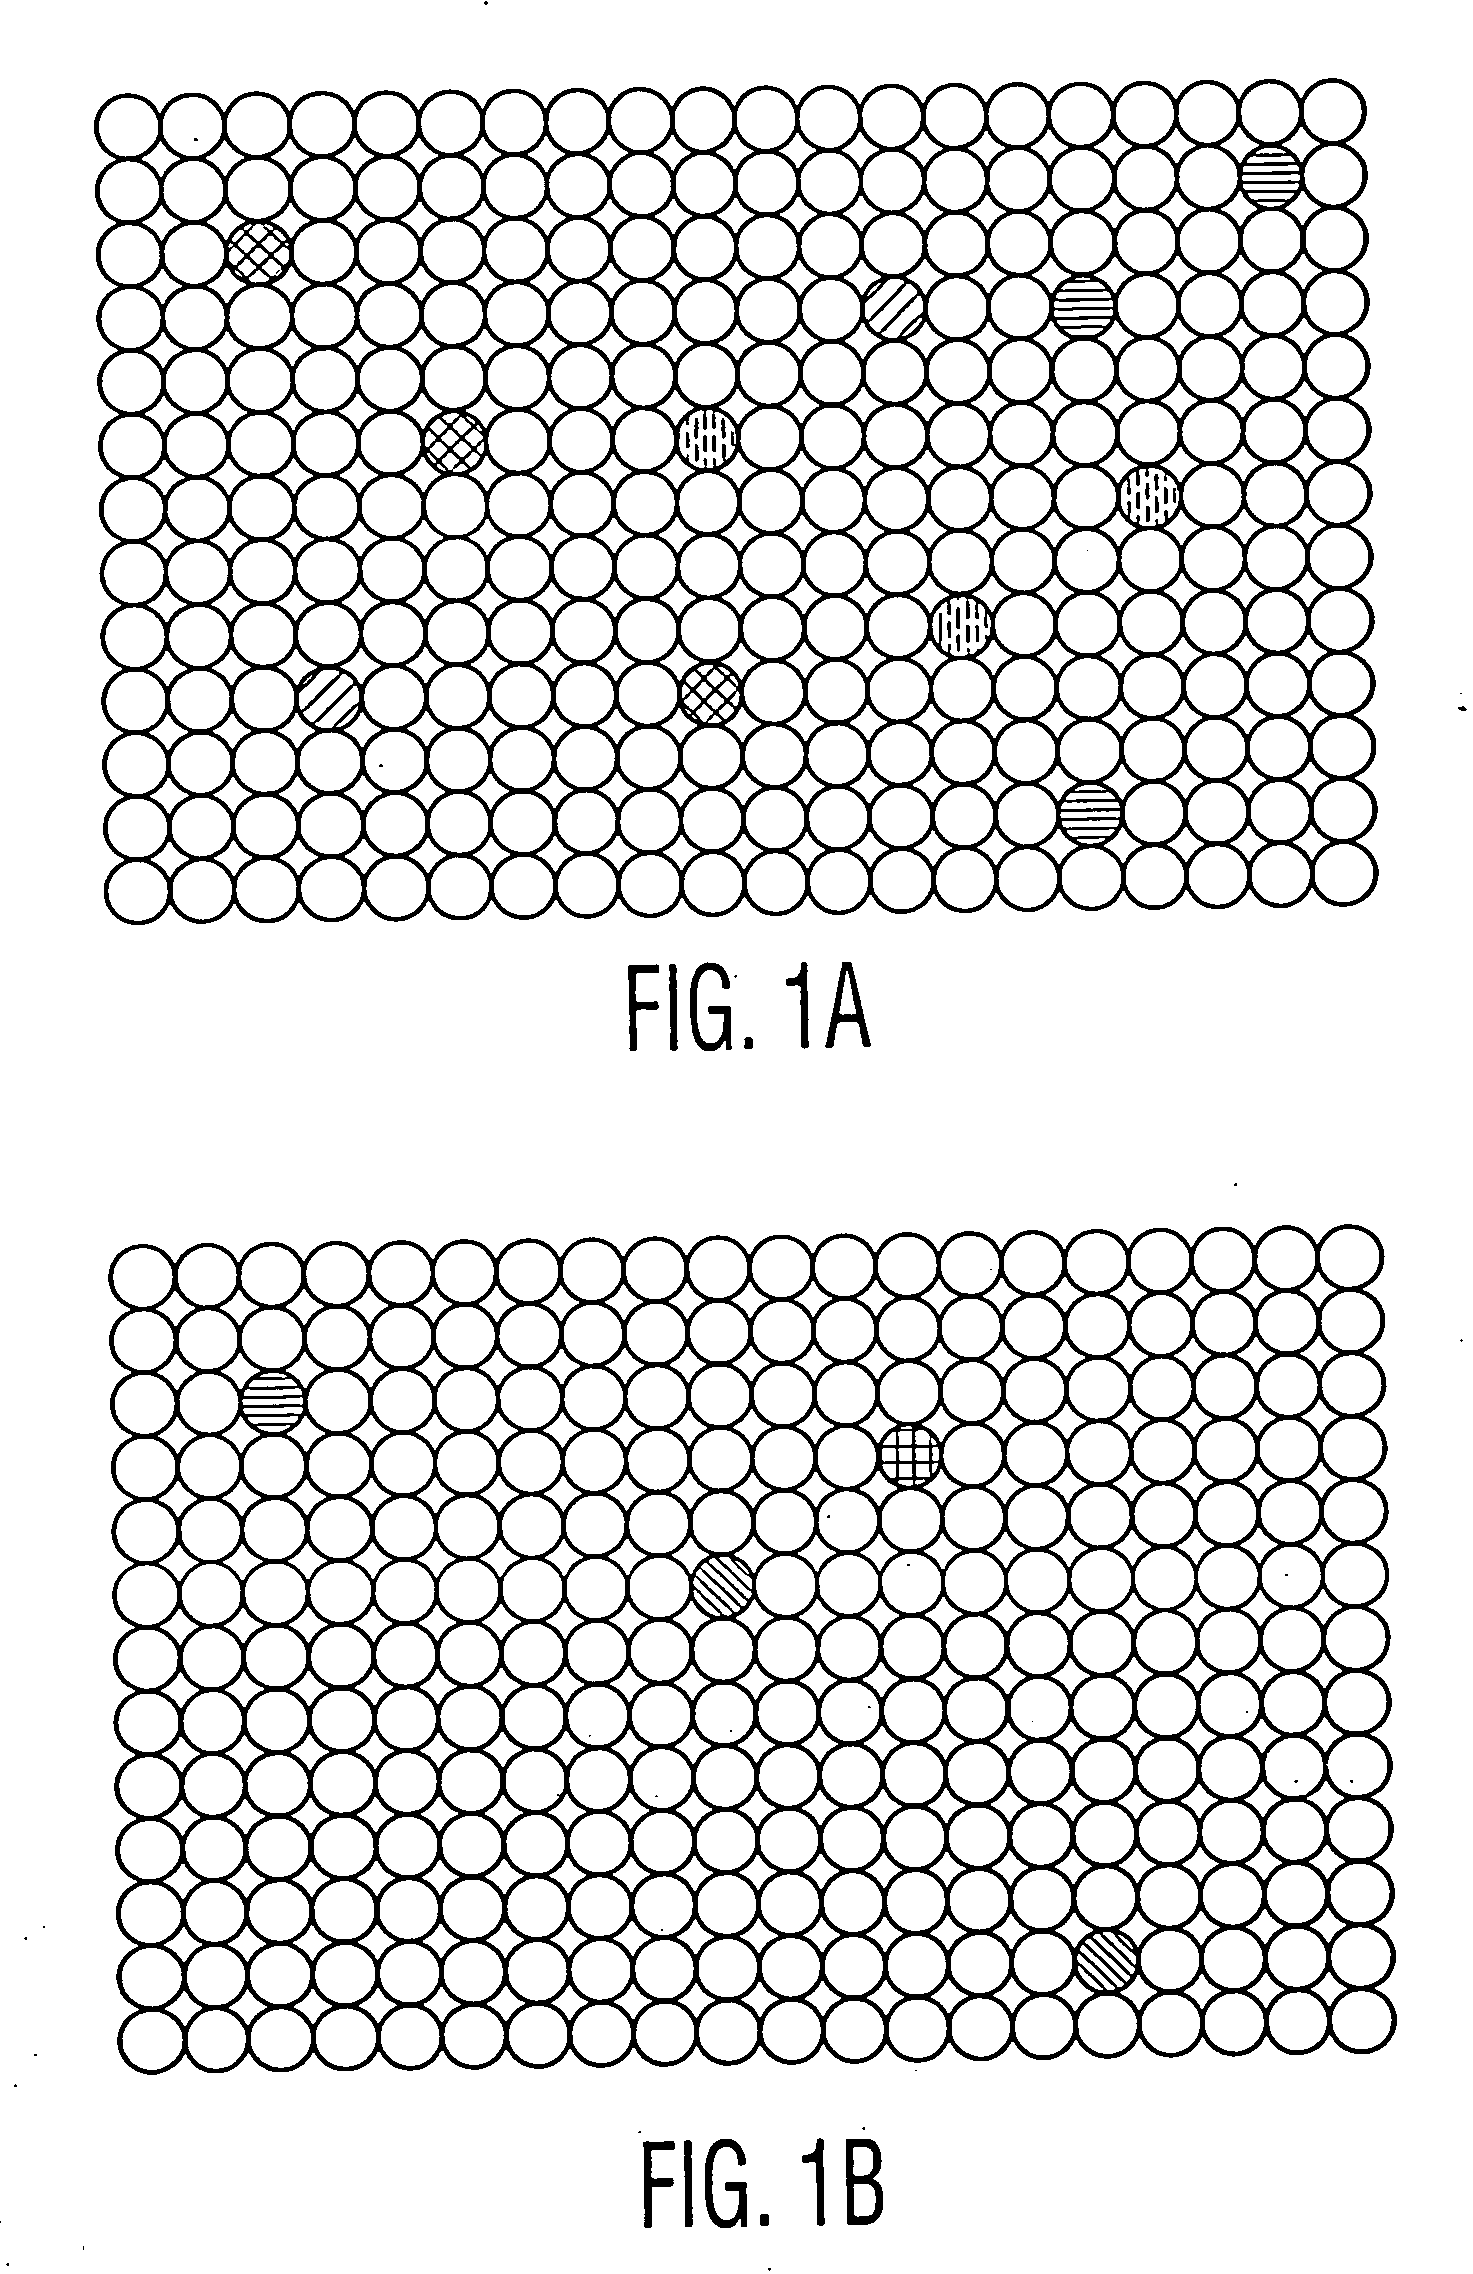 Screening antibodies using an optical fiber array device capable of simultaneously performing multiple functional assays